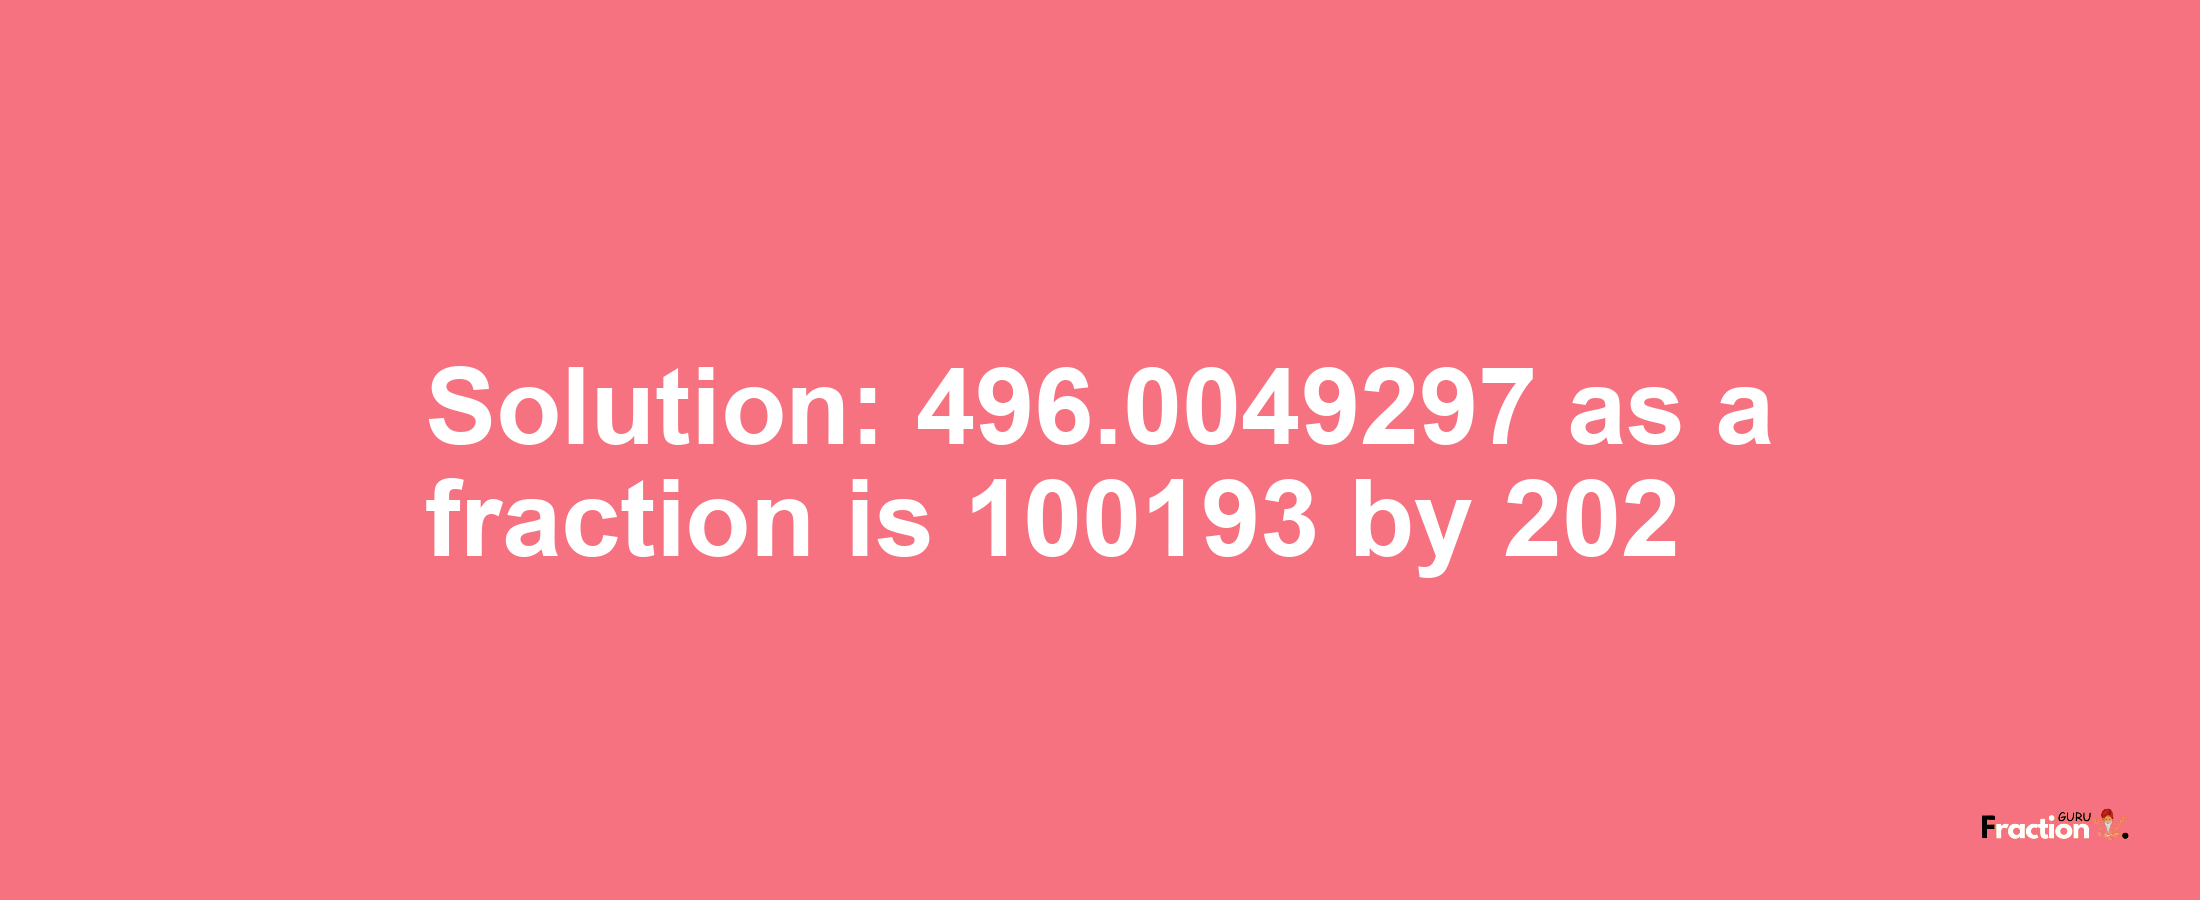 Solution:496.0049297 as a fraction is 100193/202